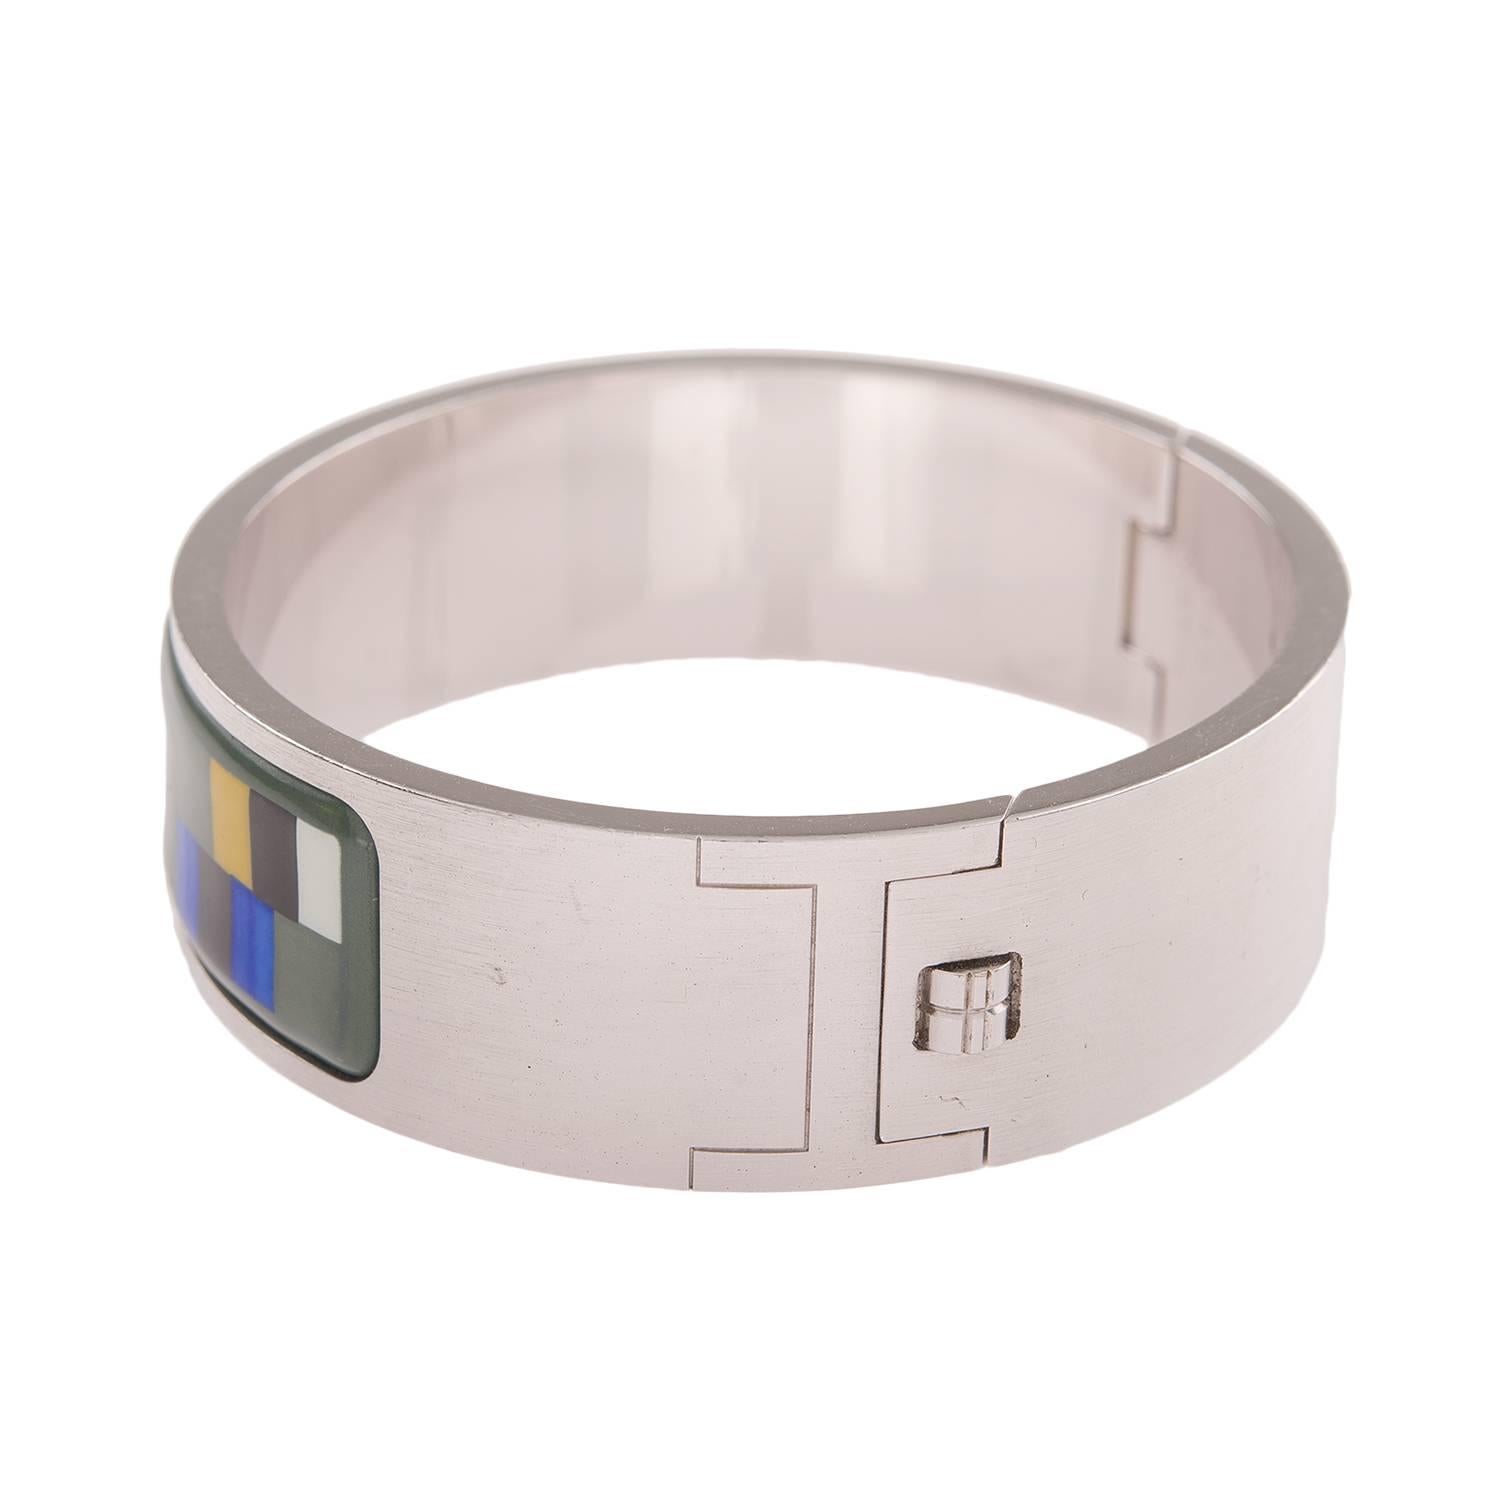 Hermes vintage printed enamel bracelet size PM (65).
 
This bracelet depicts multi-color color blocks on a green background with stainless steel hardware.

Origin: France
 
Condition: Excellent; minor scratches, retains shiny hardware
 
Accompanied